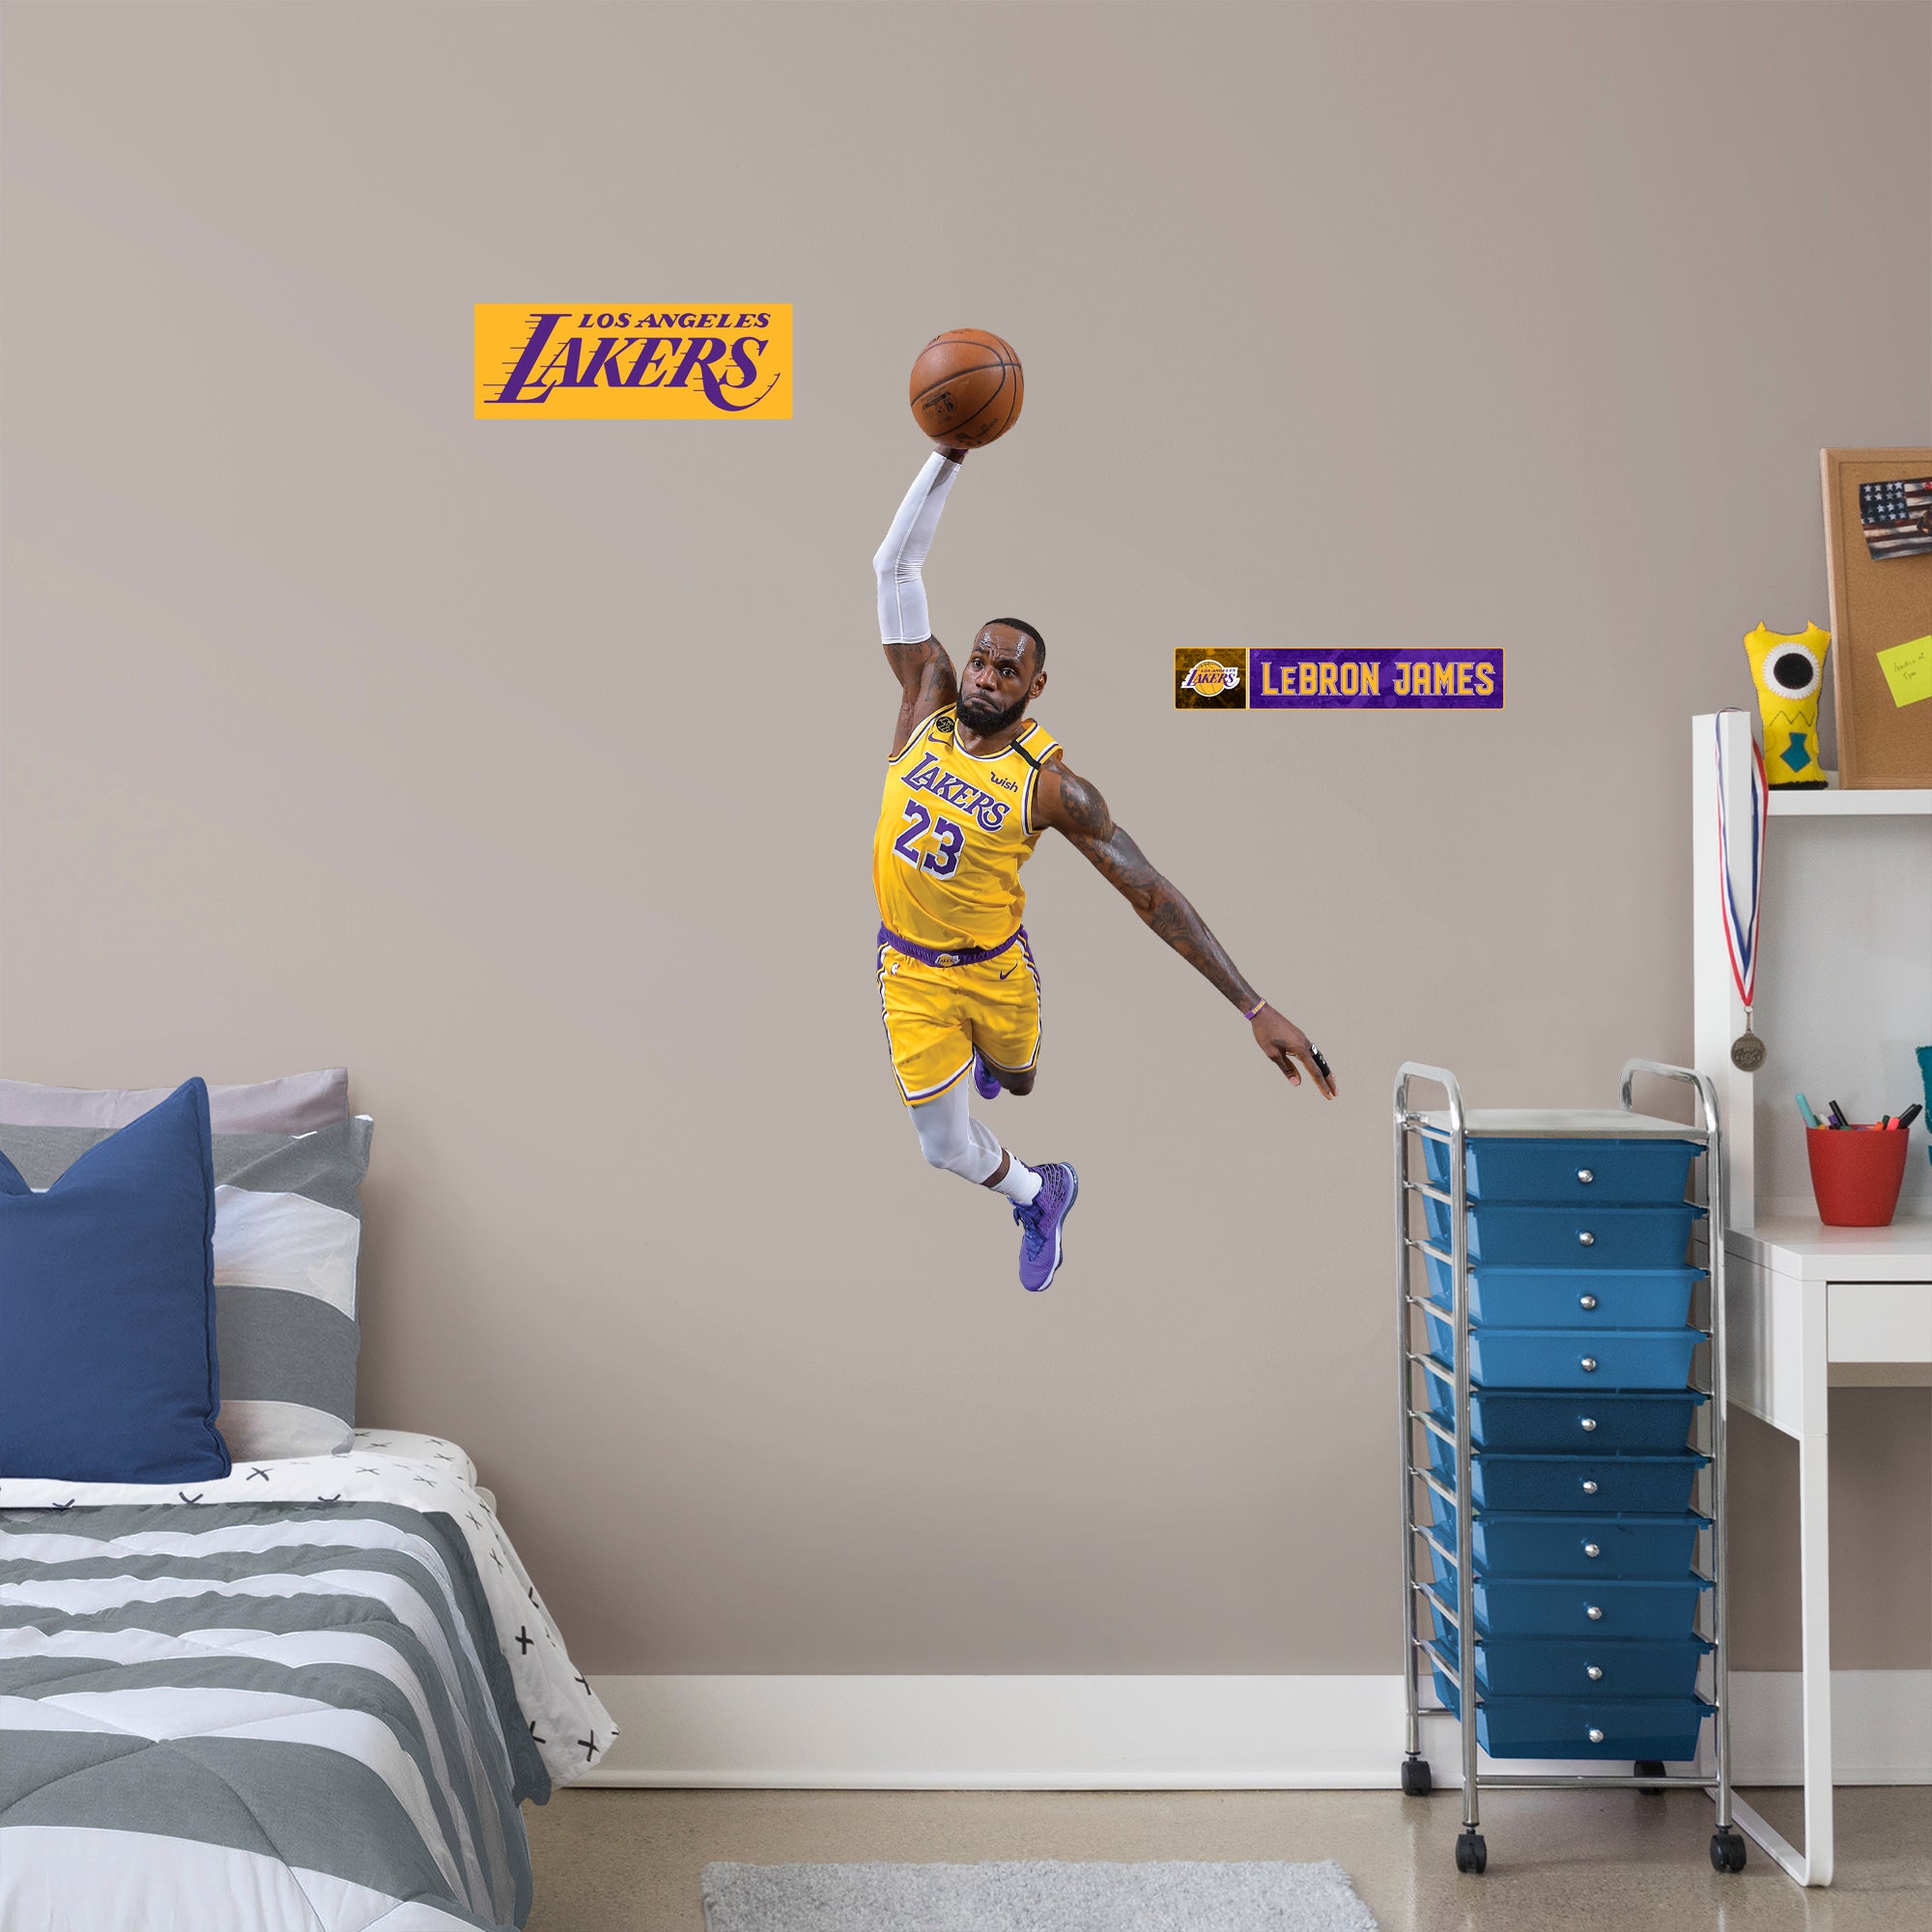 LeBron James for Los Angeles Lakers: Dunk - Officially Licensed NBA Removable Wall Decal Giant Athlete + 2 Decals by Fathead | V